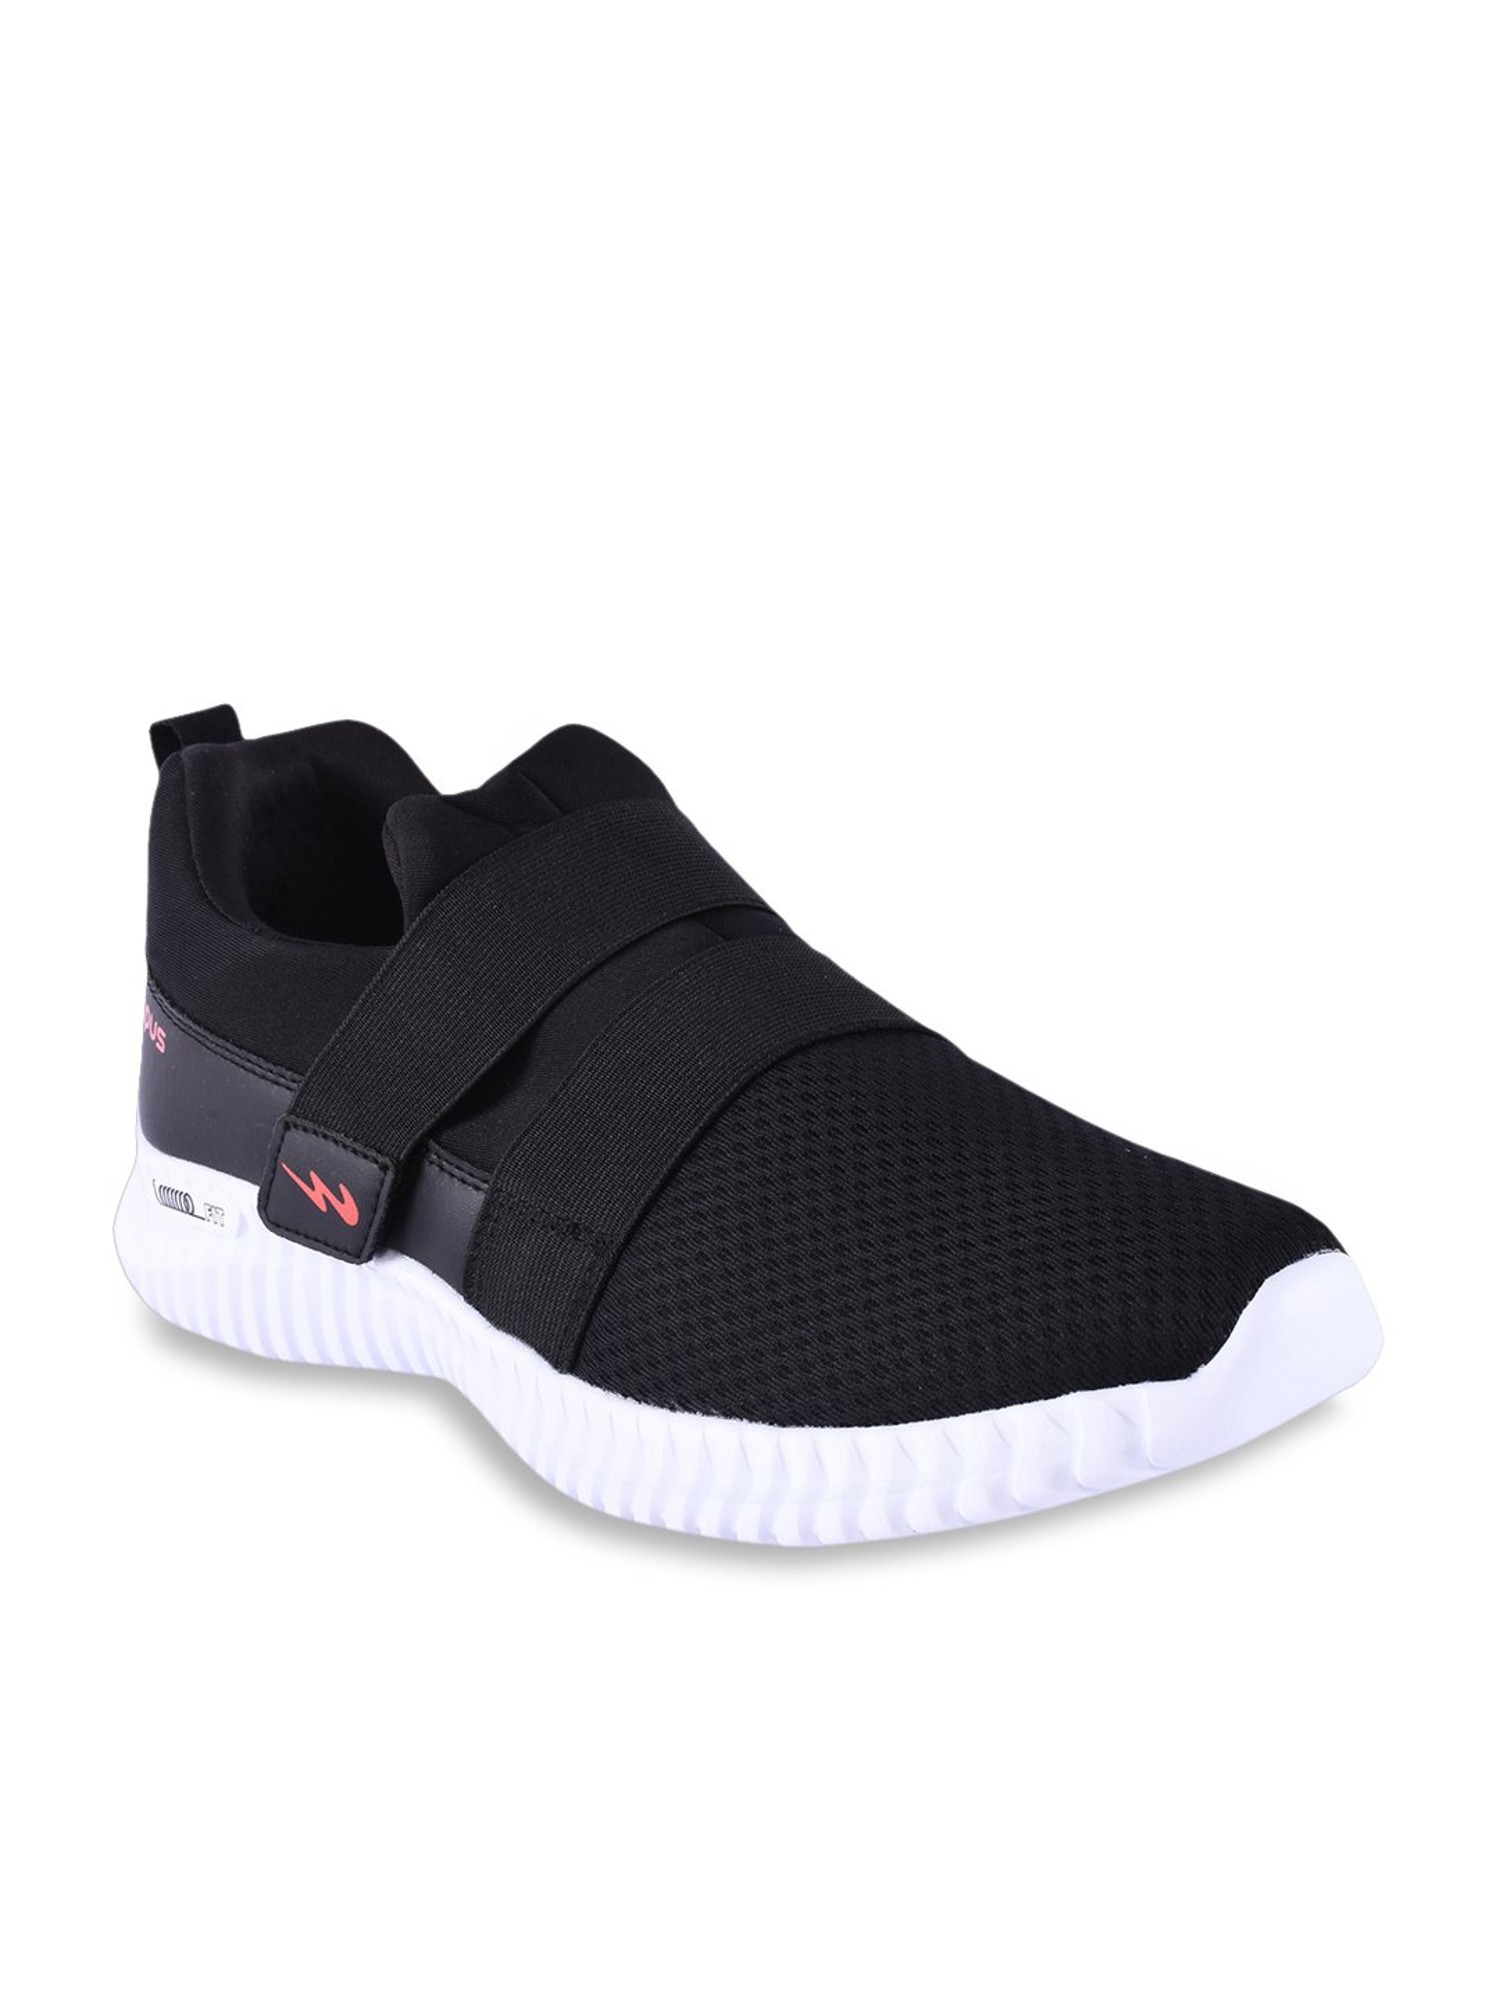 Campus S Cross Black Running Shoes from 